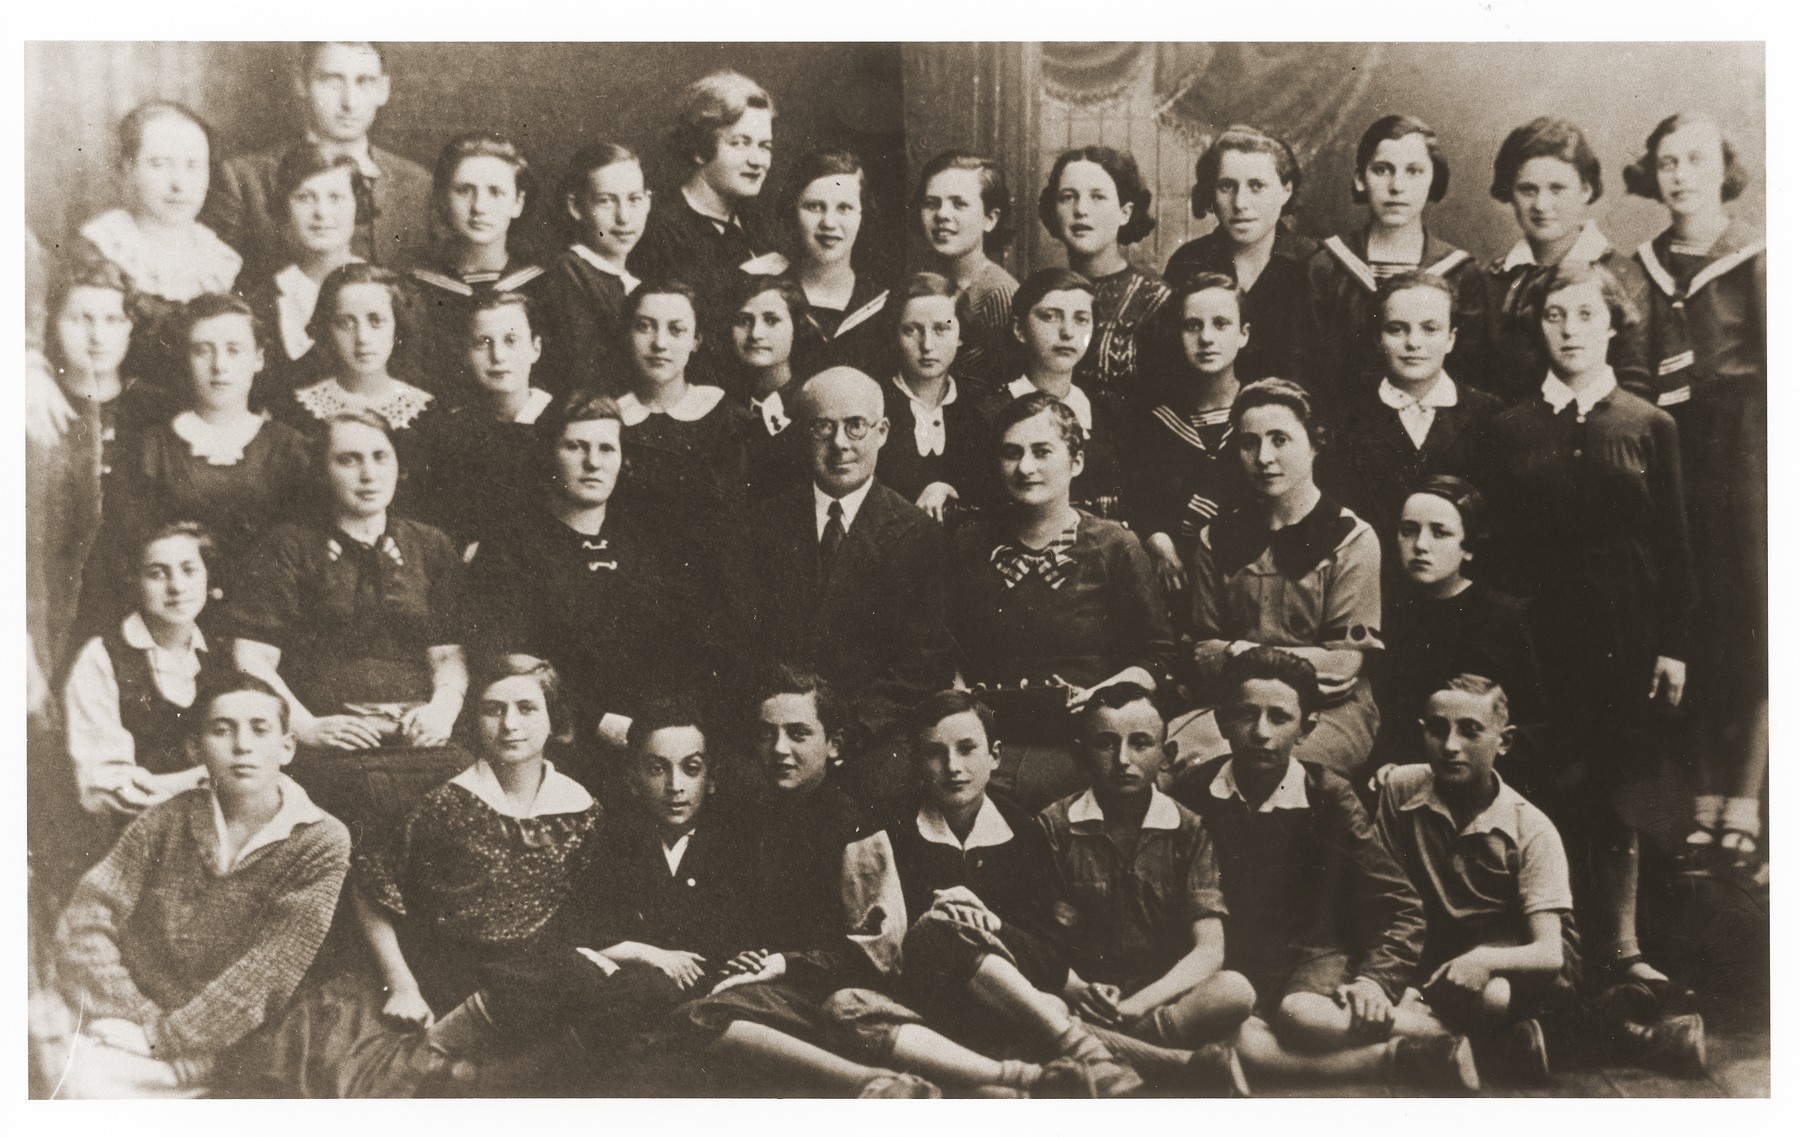 Class portrait of students at the Jewish public school in Mlawa, Poland.  

Gittel Blankitner is seated in the second row from the front on the far right.

Gerzon Trzcina was born in Krasnosielc, Poland in 1922.  He was the son of Dina Kassel and Benam Yitzhak, who was a businessman in the leather trade.  Gerzon had one older brother, Jacob, and two sisters, Faiga (b. 1918) and Perl (b. 1920).  When the war broke out, Gerzon was working as a photographer's assistant (among other jobs) in Warsaw.  Following the German invasion of September, 1939, Gerzon was slightly wounded by shrapnel.  Soon after, a drunken German soldier, forcibly cut Gerzon's hair.  When the soldier made him stoop down to pick up the cuttings, Gerzon grabbed the German's gun and ran away.  After a short time in hiding, Gerzon returned to his hometown, where he learned that eighty Jews had been murdered in the synagogue during the first week of the war in one of the first large-scale atrocities against Polish Jews.  Among those killed was Gerzon's eighty-two-year-old grandfather, Haskel Kassel.  Gerzon moved on to Makow Mazowiecki, where he was forced to clean the stables the Germans had set up in the town's synagogue.  In the late fall, Gerzon escaped with his family to Bialystok, where he worked in a tannery until the family was deported to the Soviet interior in June, 1940.  Along with a group of Polish and Jewish refugees, the Trzcinas were sent to the Kiltovo labor camp in northern Russia.  Harsh conditions and poor nutrition led to Gerzon's father's death in the camp.  The family remained in Kiltovo until the German invasion of the Soviet Union in June of 1941.  Soon after, the refugees were allowed to leave the camp, and the Trzcinas moved to nearby Syktyvkar (capital of the Komi republic), where Gerzon worked in a construction company and later in a tannery.  In Syktyvkar, Gerzon was reunited with Gittel Blankitner, a Jewish refugee from Mlawa, whom he had met earlier in his travels in the Soviet Union.  (Gittel's father perished in Aushwitz, and her mother and siblings were killed in Treblinka.) In November, 1944, Gerzon and Gittel were married. The couple left the Soviet Union with their new baby in 1946.  Returning for a brief time to Poland, the family soon joined the wave of survivors streaming toward the Western zones of occupation.  After their arrival in Germany, the Trzcinas stayed in several DP camps including Vilseck, Wurzburg and Lechfeld, where Gerzon worked as an UNRRA photographer.  In March 1951, the family immigrated to the United States.